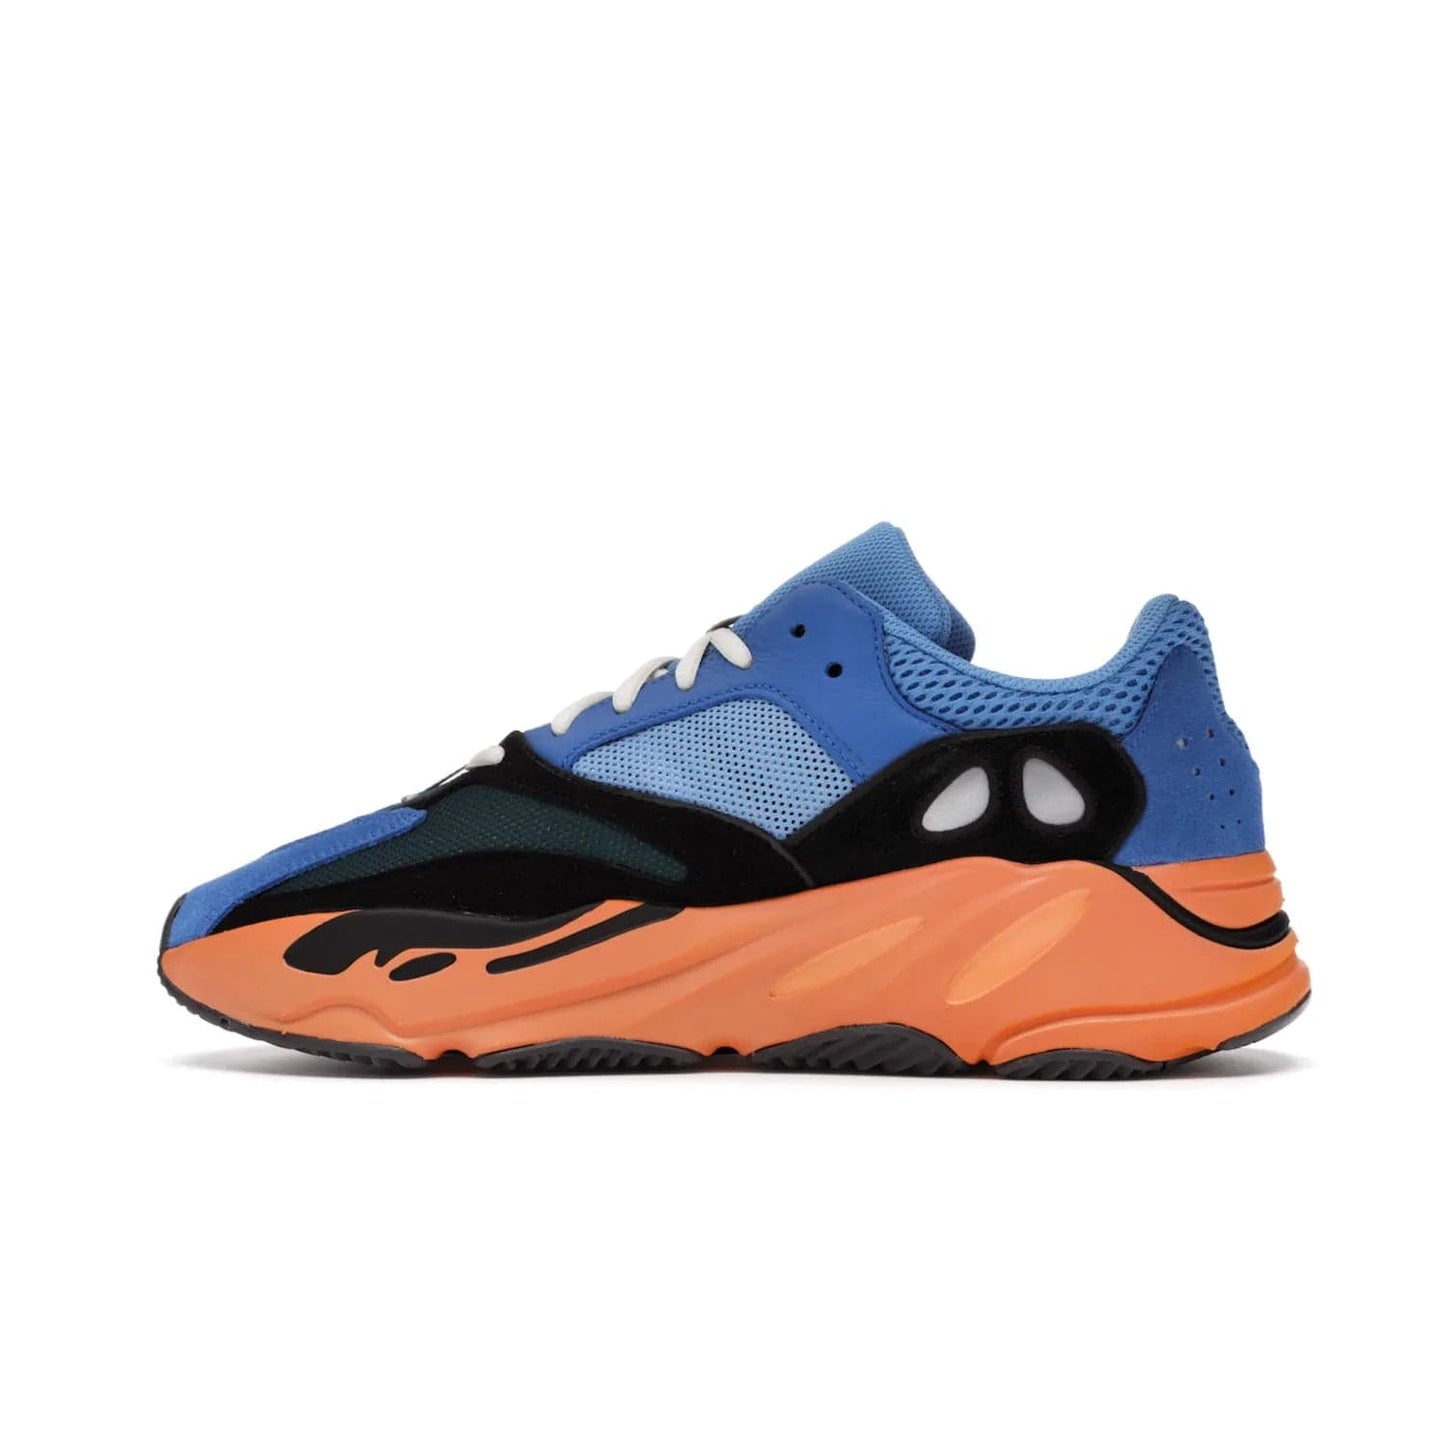 adidas Yeezy Boost 700 Bright Blue - Image 20 - Only at www.BallersClubKickz.com - Iconic sneaker style meets vibrant colour with the adidas Yeezy Boost 700 Bright Blue. Reflective accents, turquoise and teal panels, bright orange midsole and black outsole make for a bold release. April 2021.